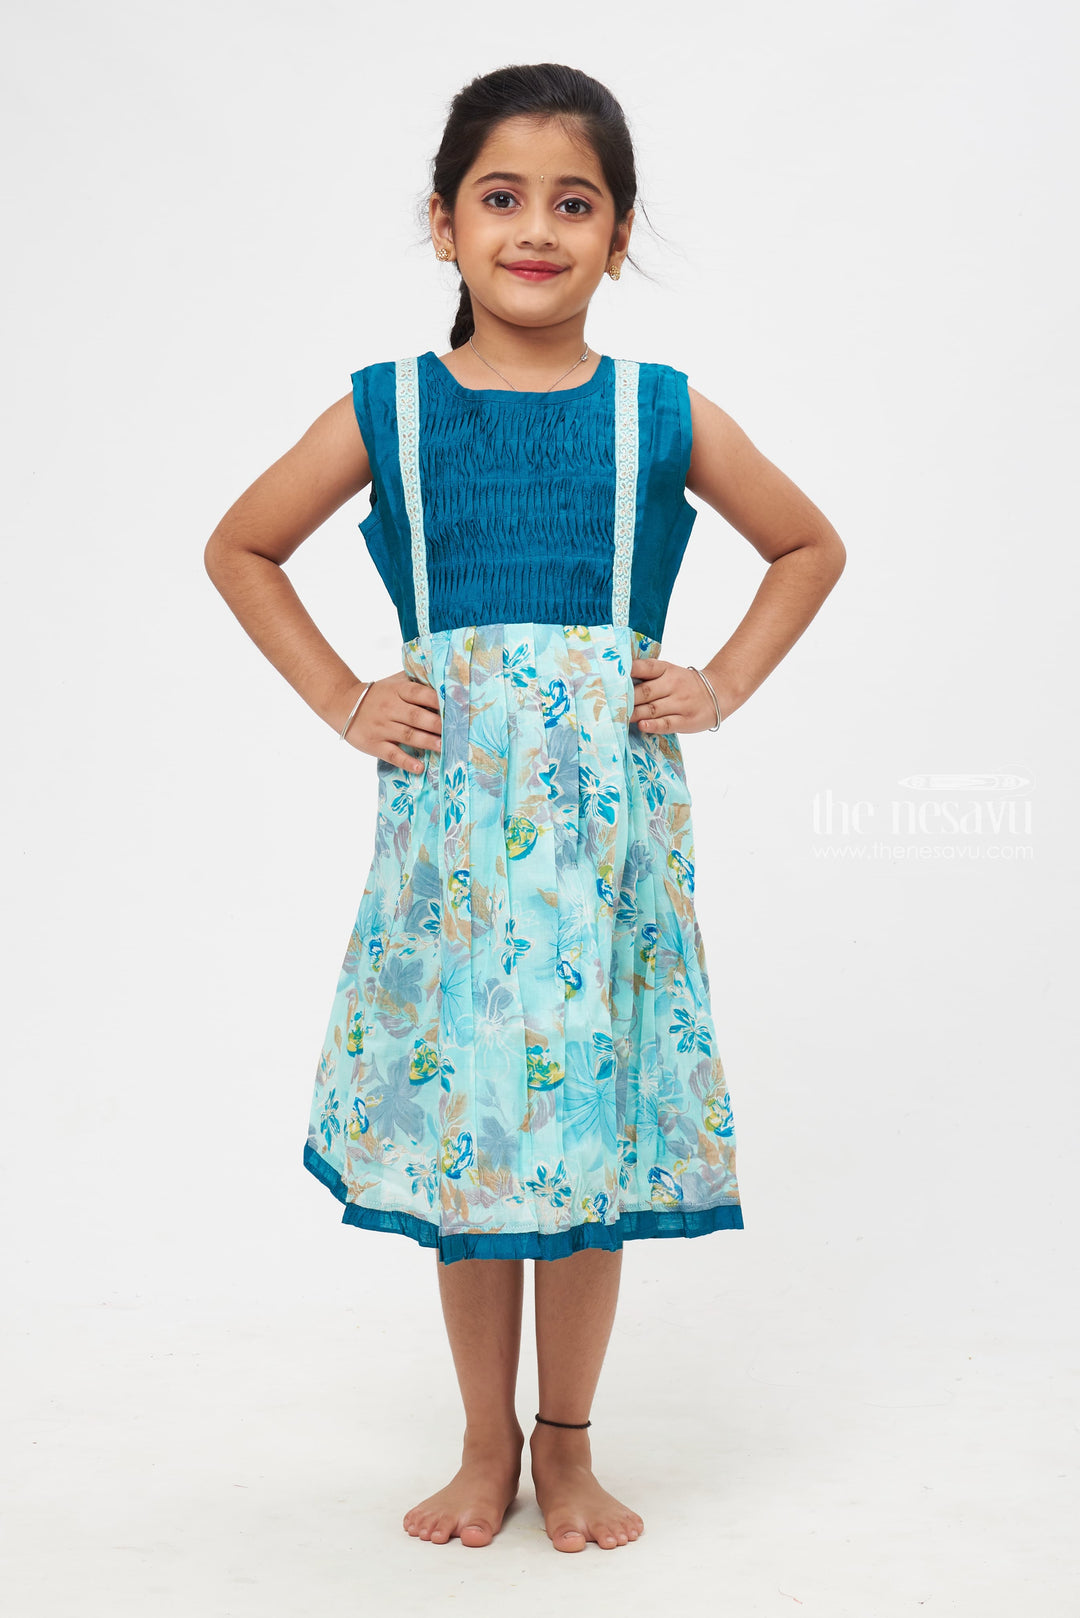 The Nesavu Girls Cotton Frock Natures Beauty in Fabric : Enchanted Teal Floral Fusion Dress with Lace Trimmings Nesavu 14 (6M) / Blue / Cotton GFC1167A-14 A Twist to Traditional | Contemporary Cotton Frock Styles for Girls | The Nesavu